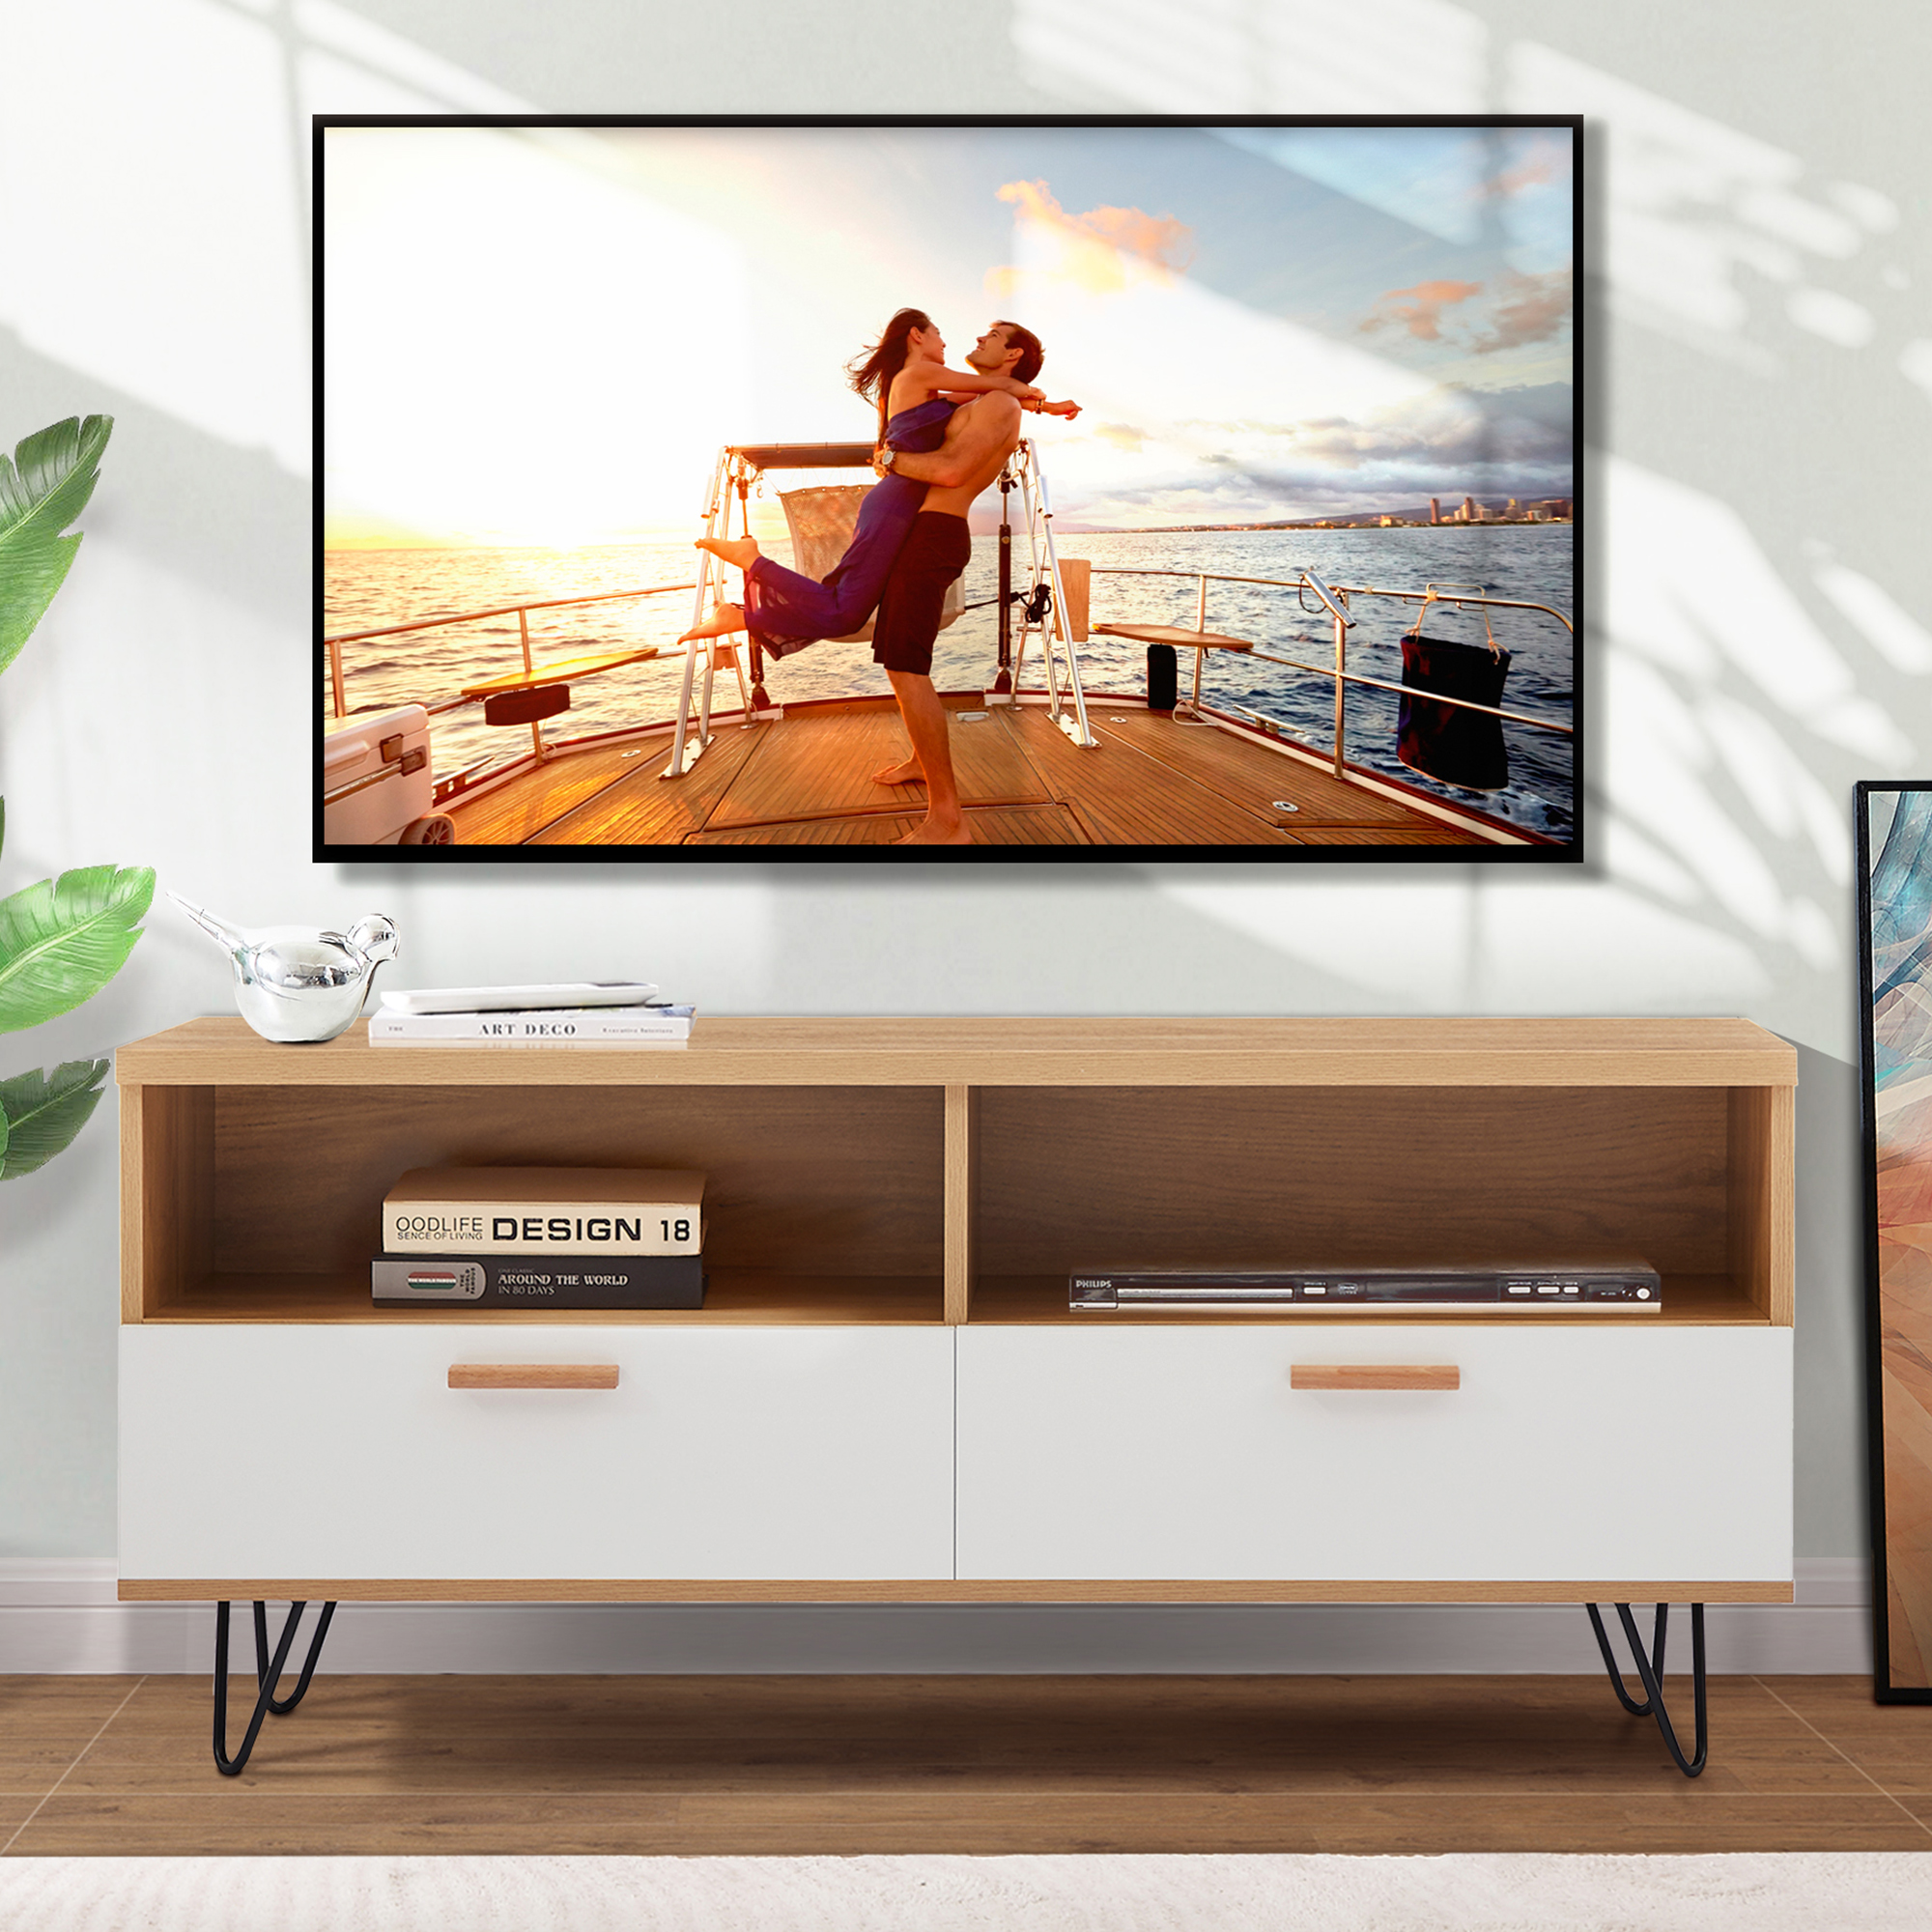 15 minutes quick assemble WOOD+WHITE morden TV Stand,high quality table top and wood grain color TV Cabinet,can be assembled in Lounge Room, Living Room or Bedroom,color:WHITE+WOOD-Boyel Living